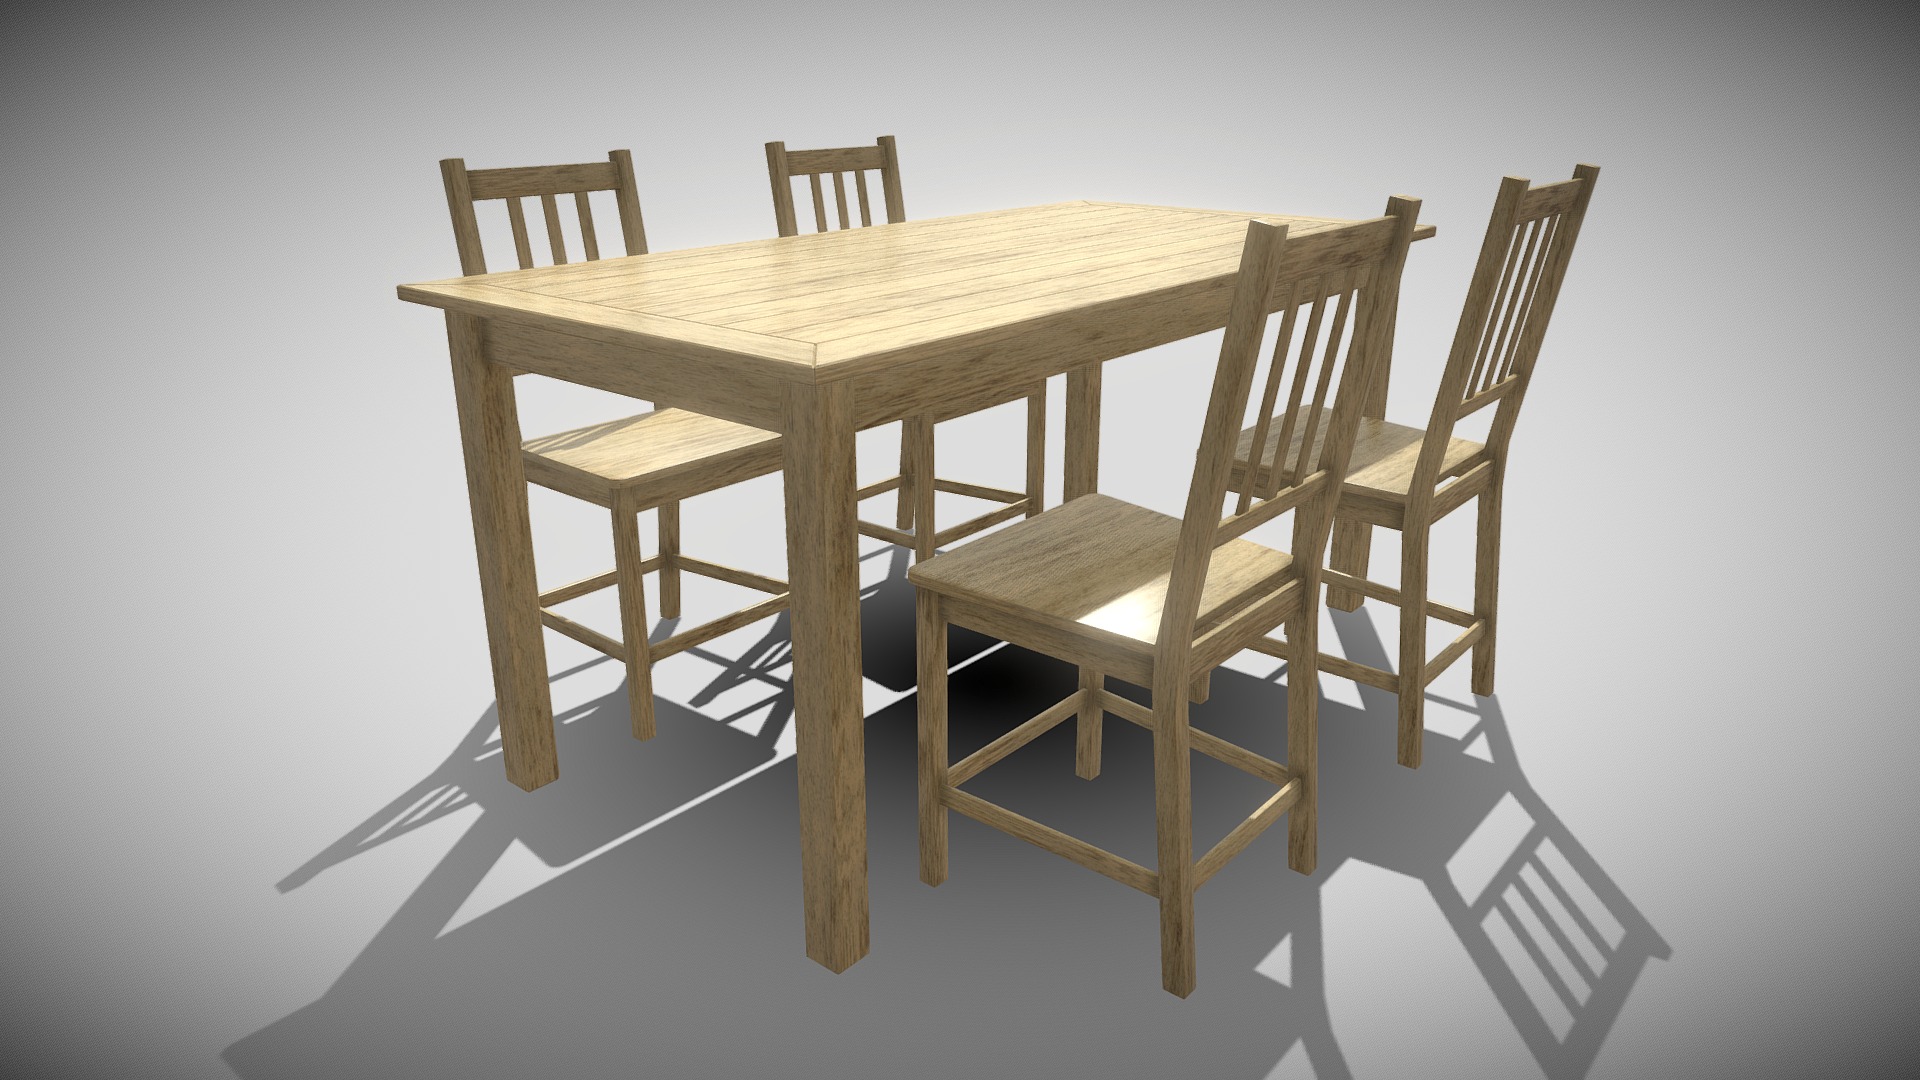 3D model Garden Furniture 4 person - This is a 3D model of the Garden Furniture 4 person. The 3D model is about a table with chairs around it.